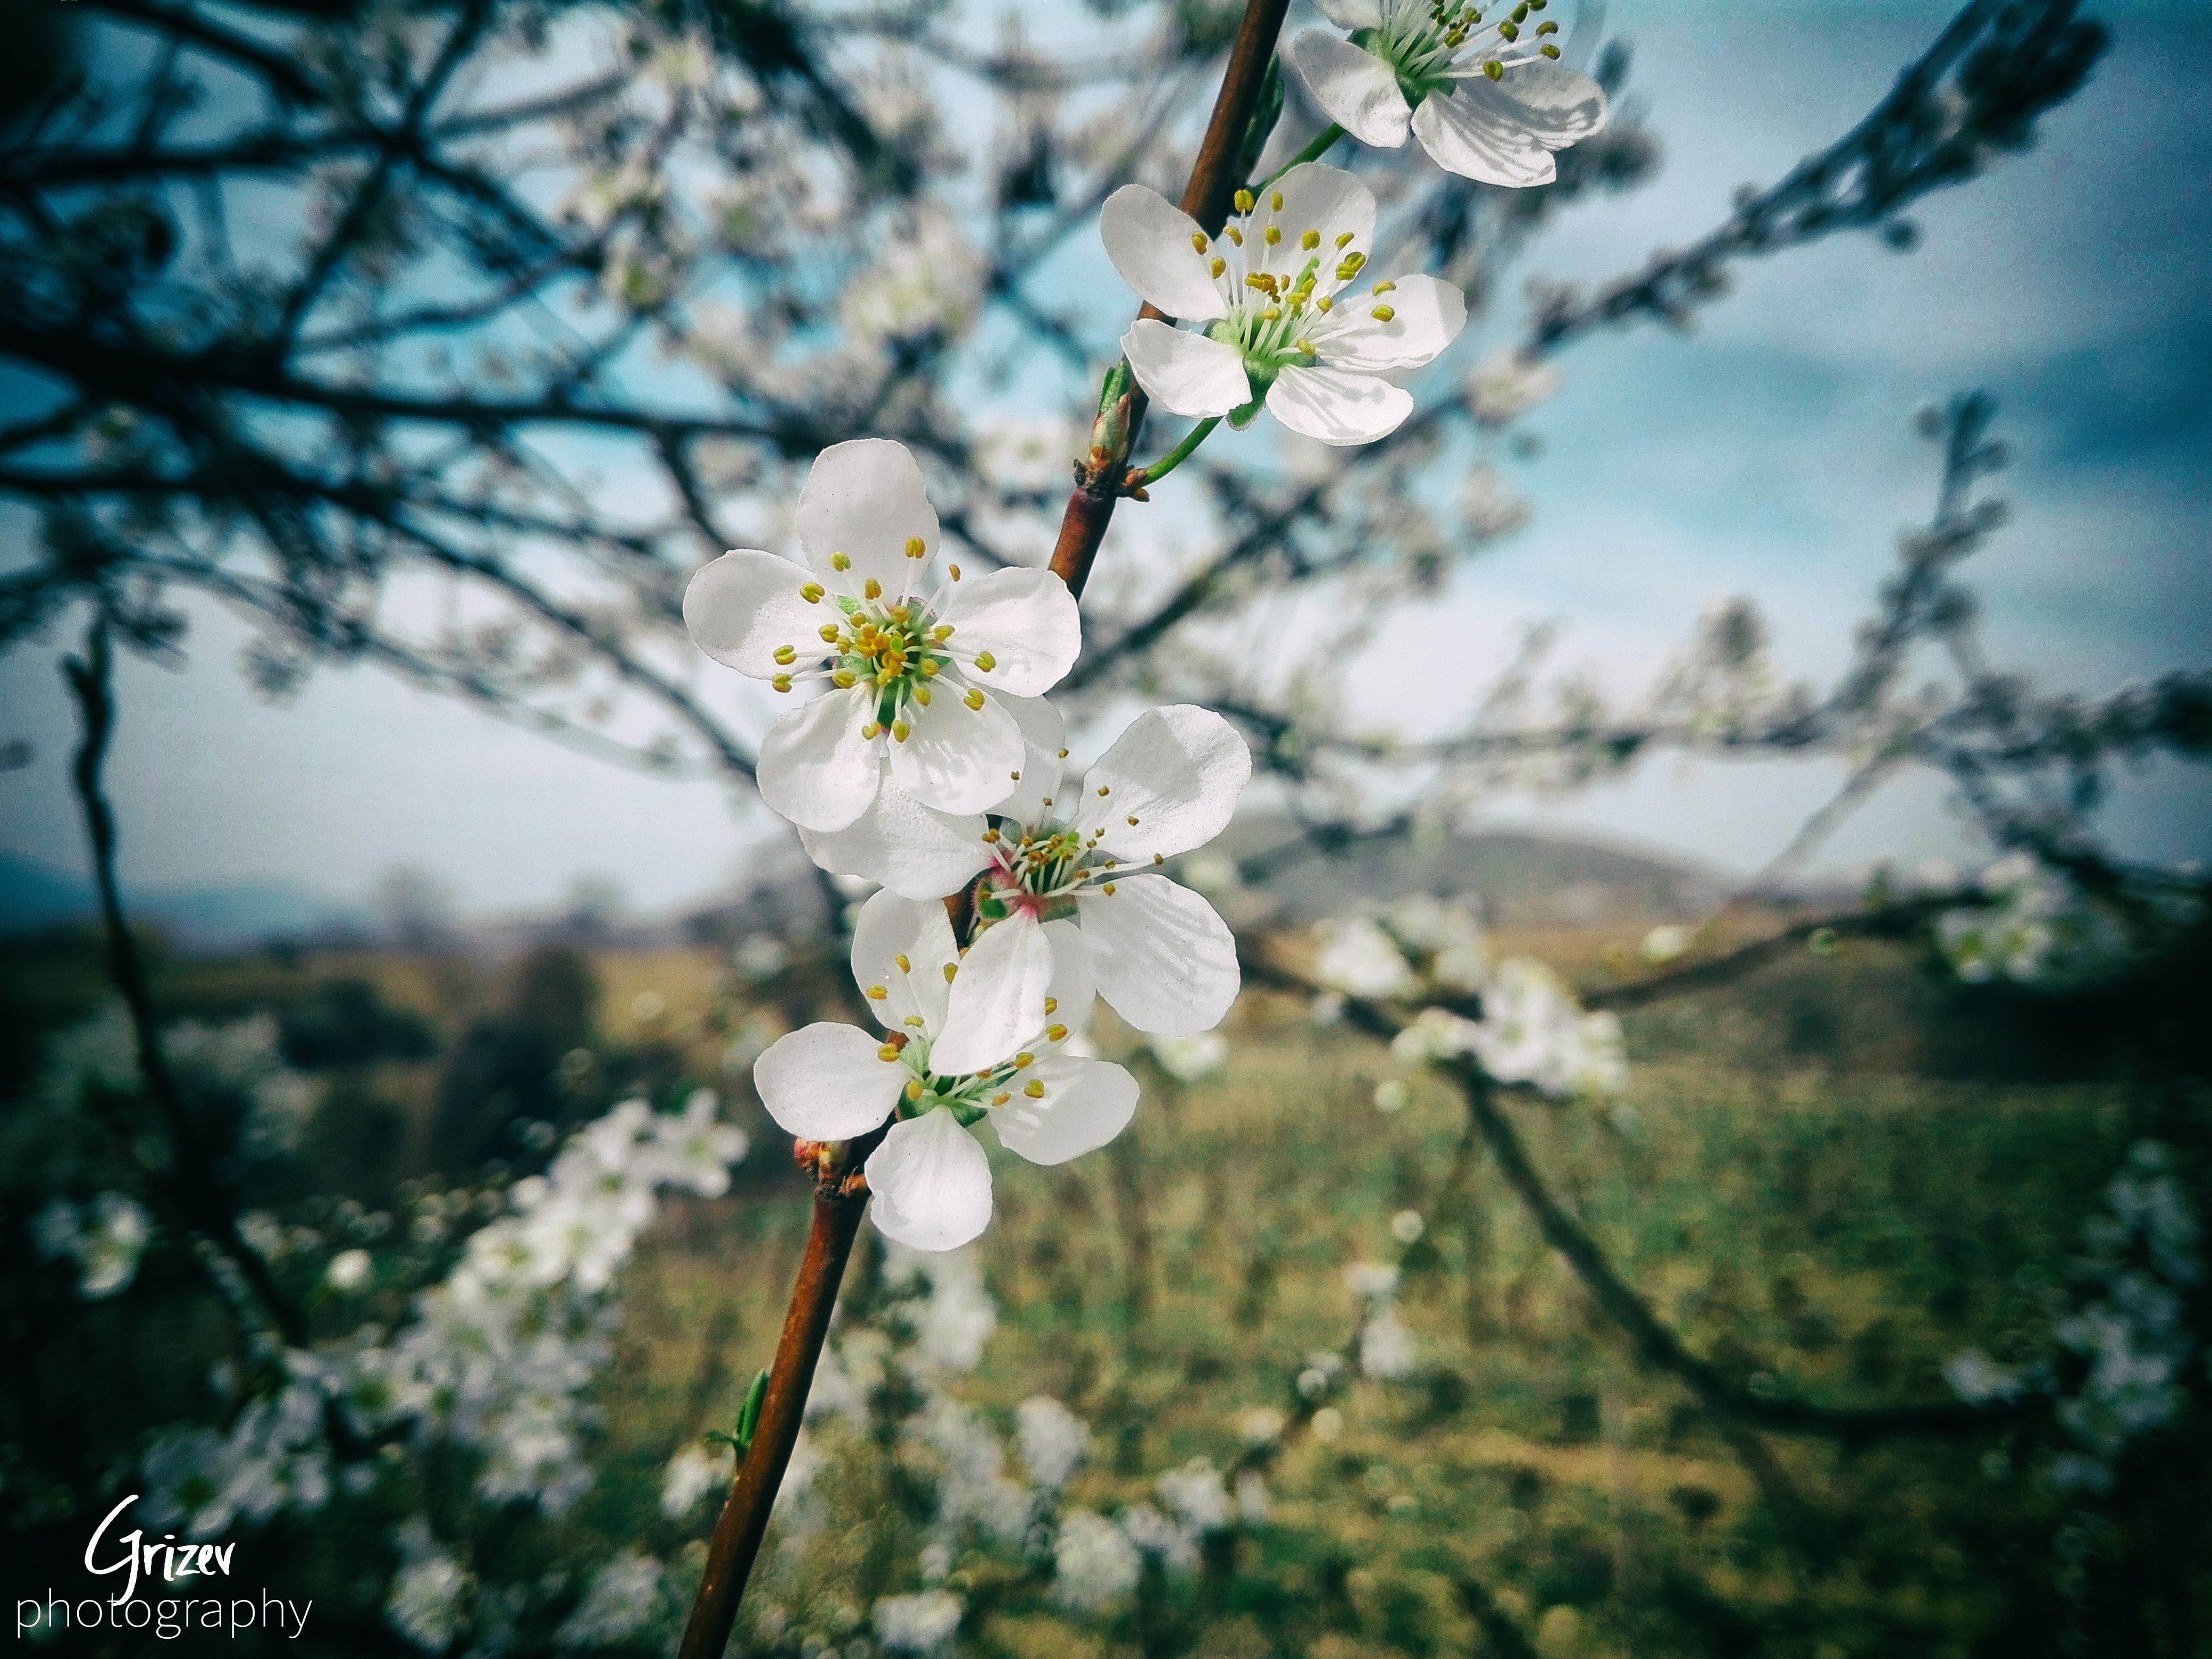 white petaled flowers, Sun, cherry blossom, clouds, hot spring